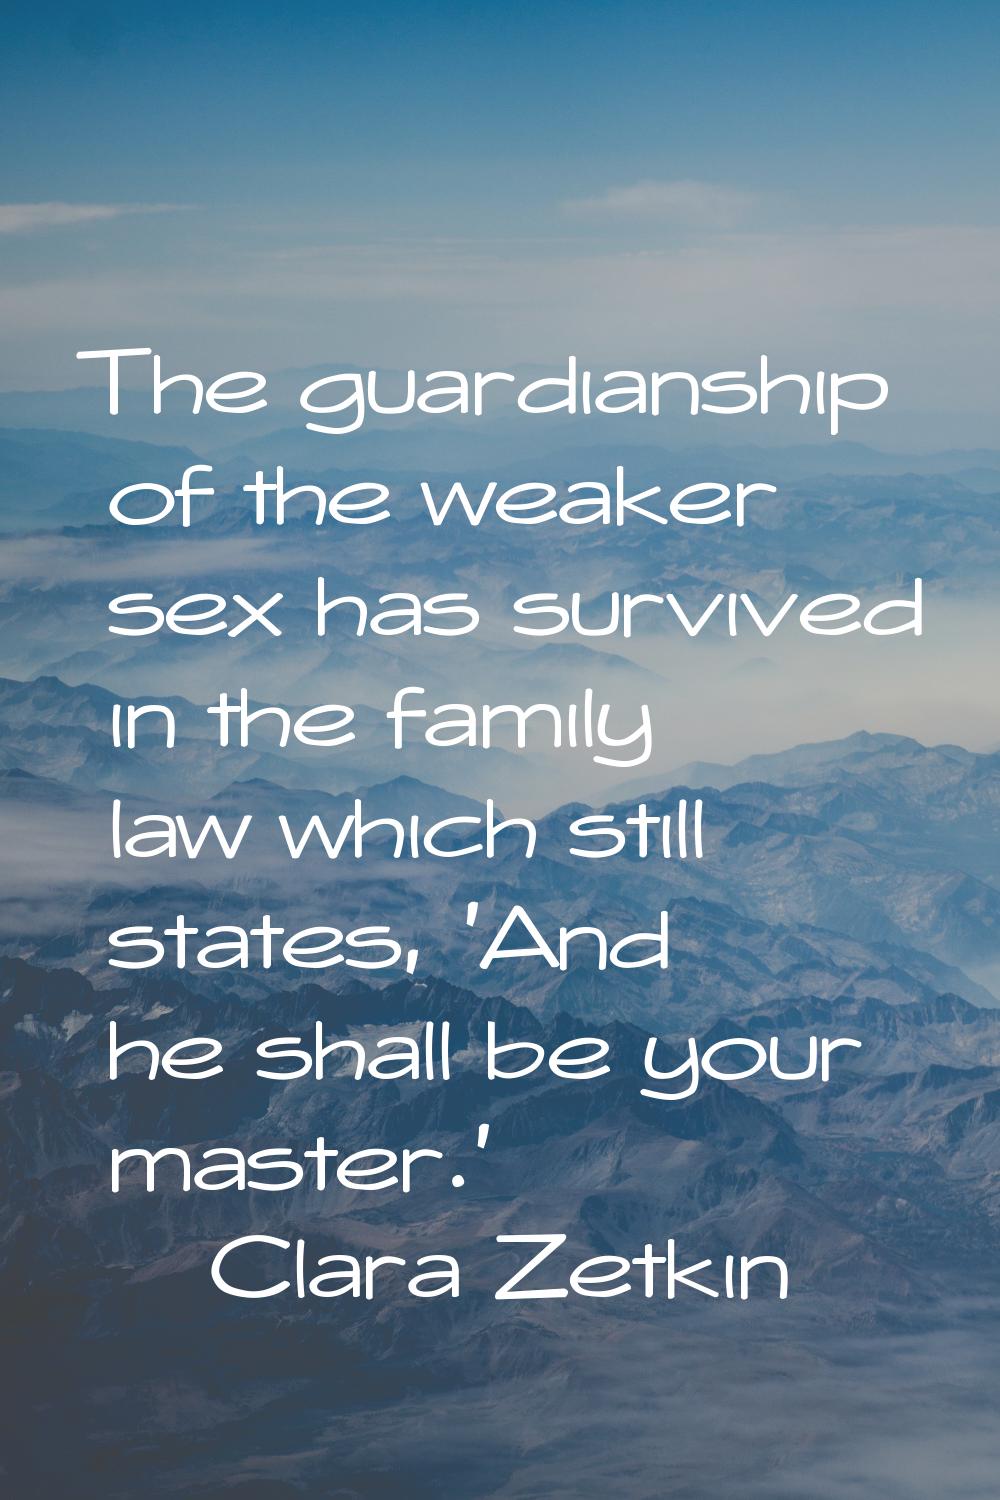 The guardianship of the weaker sex has survived in the family law which still states, 'And he shall